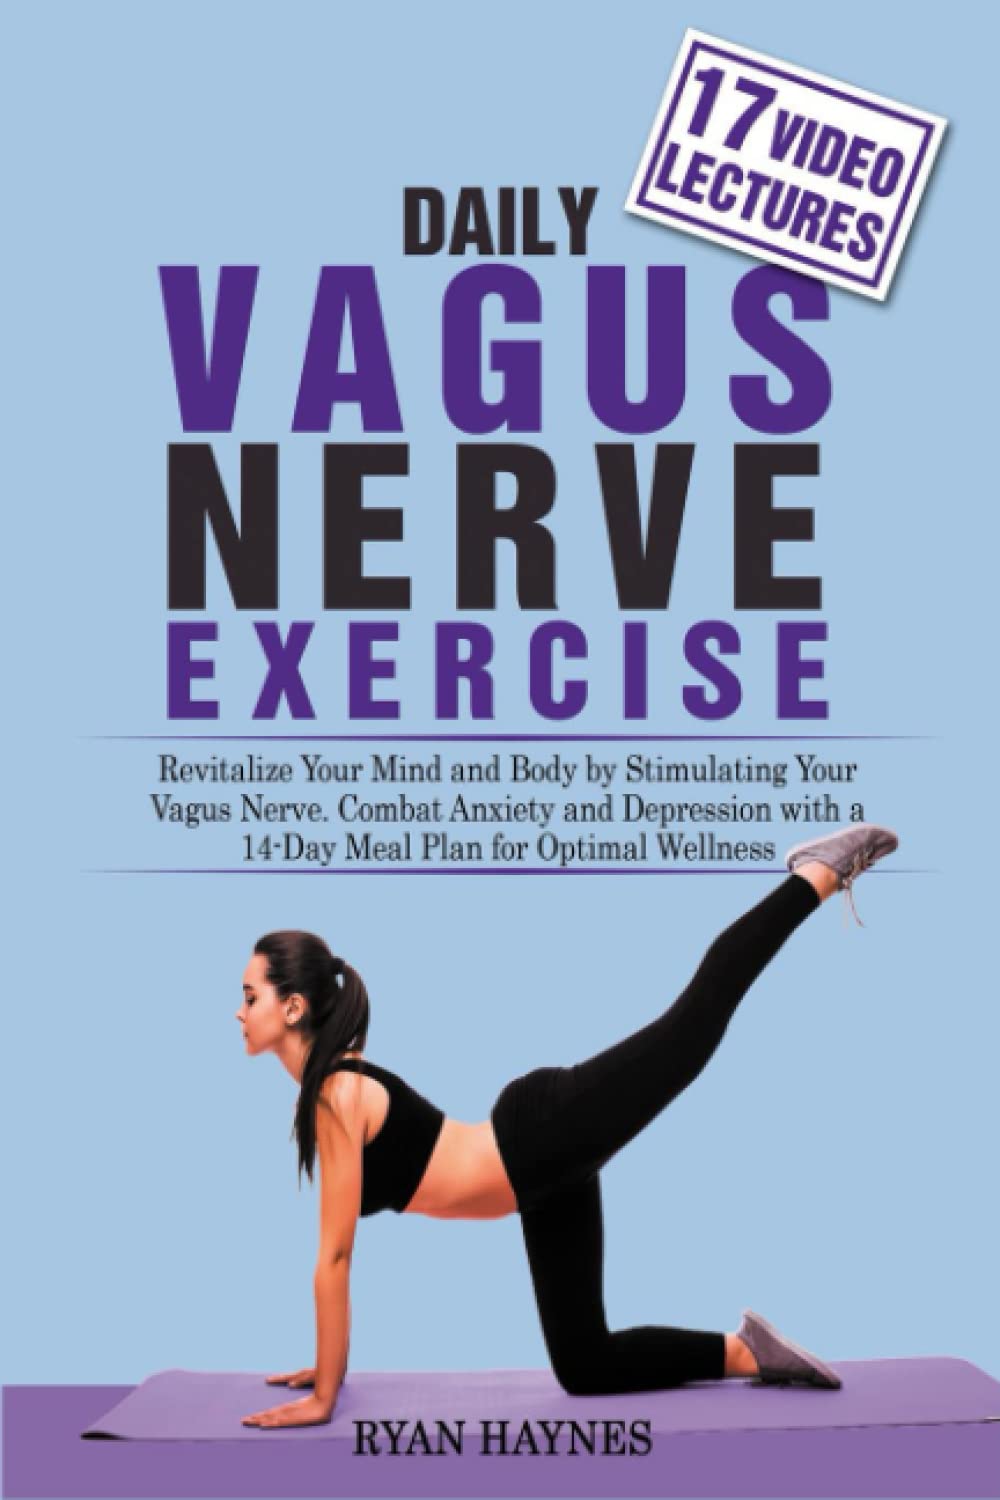 Daily Vagus Nerve Exercise: REVITALIZE YOUR MIND AND BODY BY STIMULATING YOUR VAGUS NERVE. COMBAT ANXIETY AND DEPRESSION WITH A 14-DAY MEAL PLAN FOR OPTIMAL WELLNESS